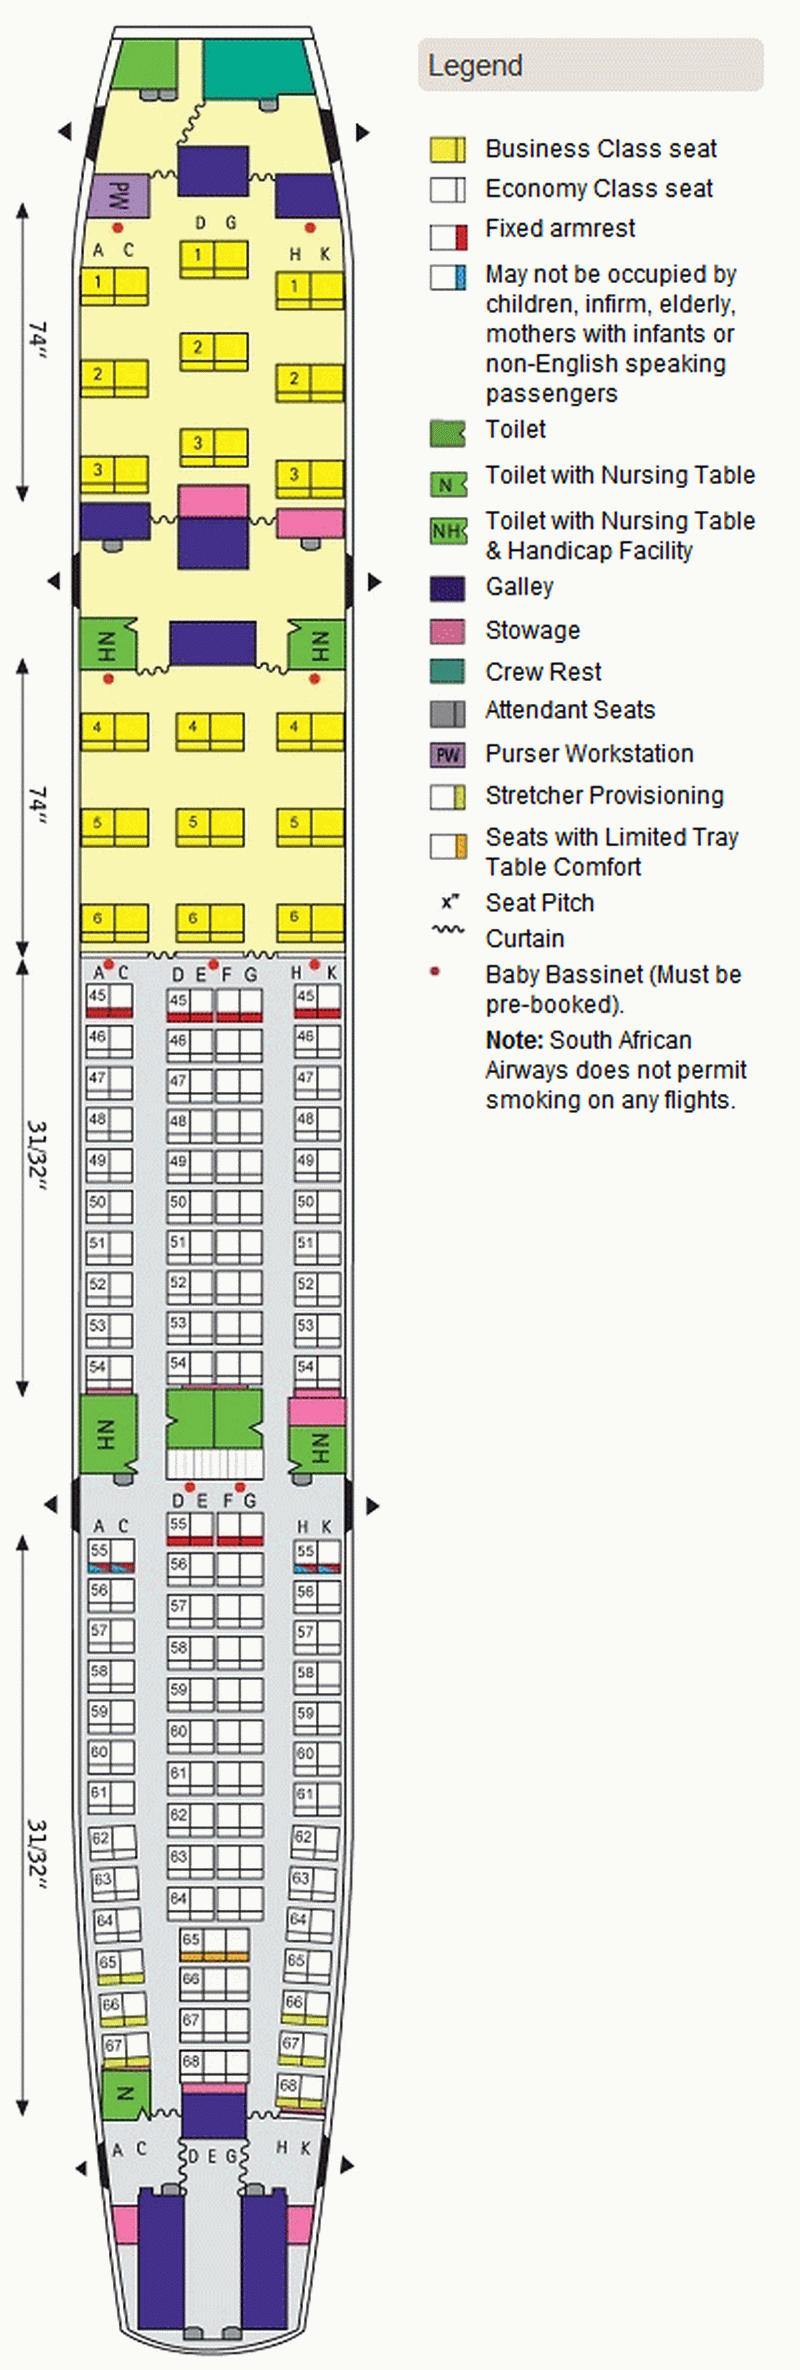 SOUTH AFRICAN AIRWAYS AIRBUS A330-200 AIRCRAFT SEATING CHART